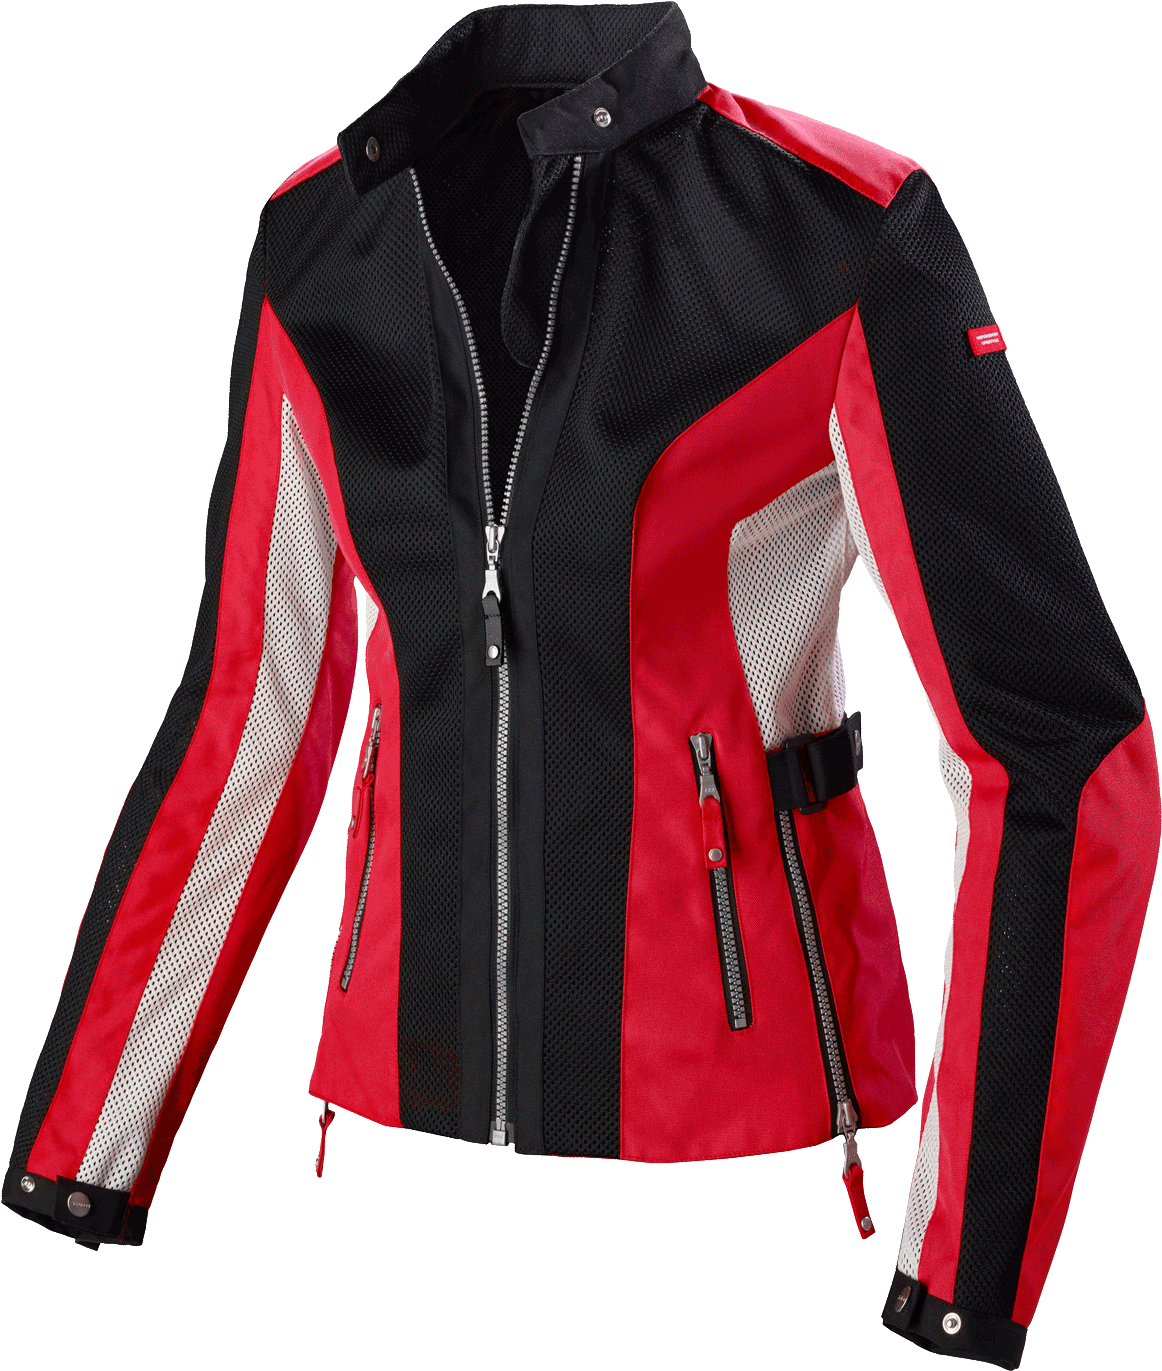 A Red And Black Jacket